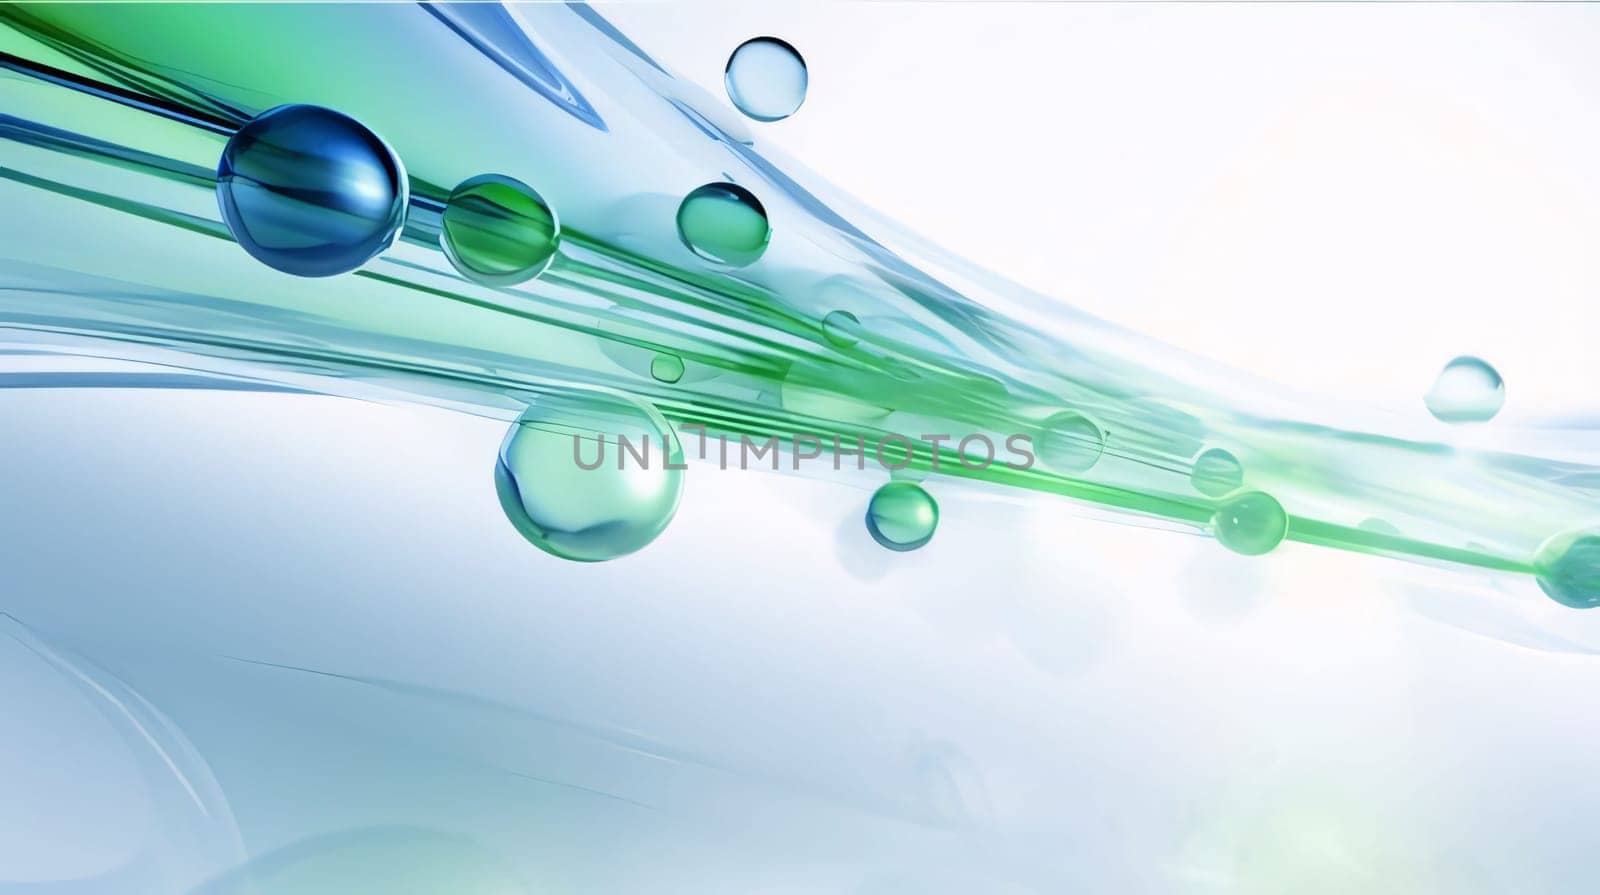 Abstract background design: 3d illustration of abstract background with water droplets and green lines